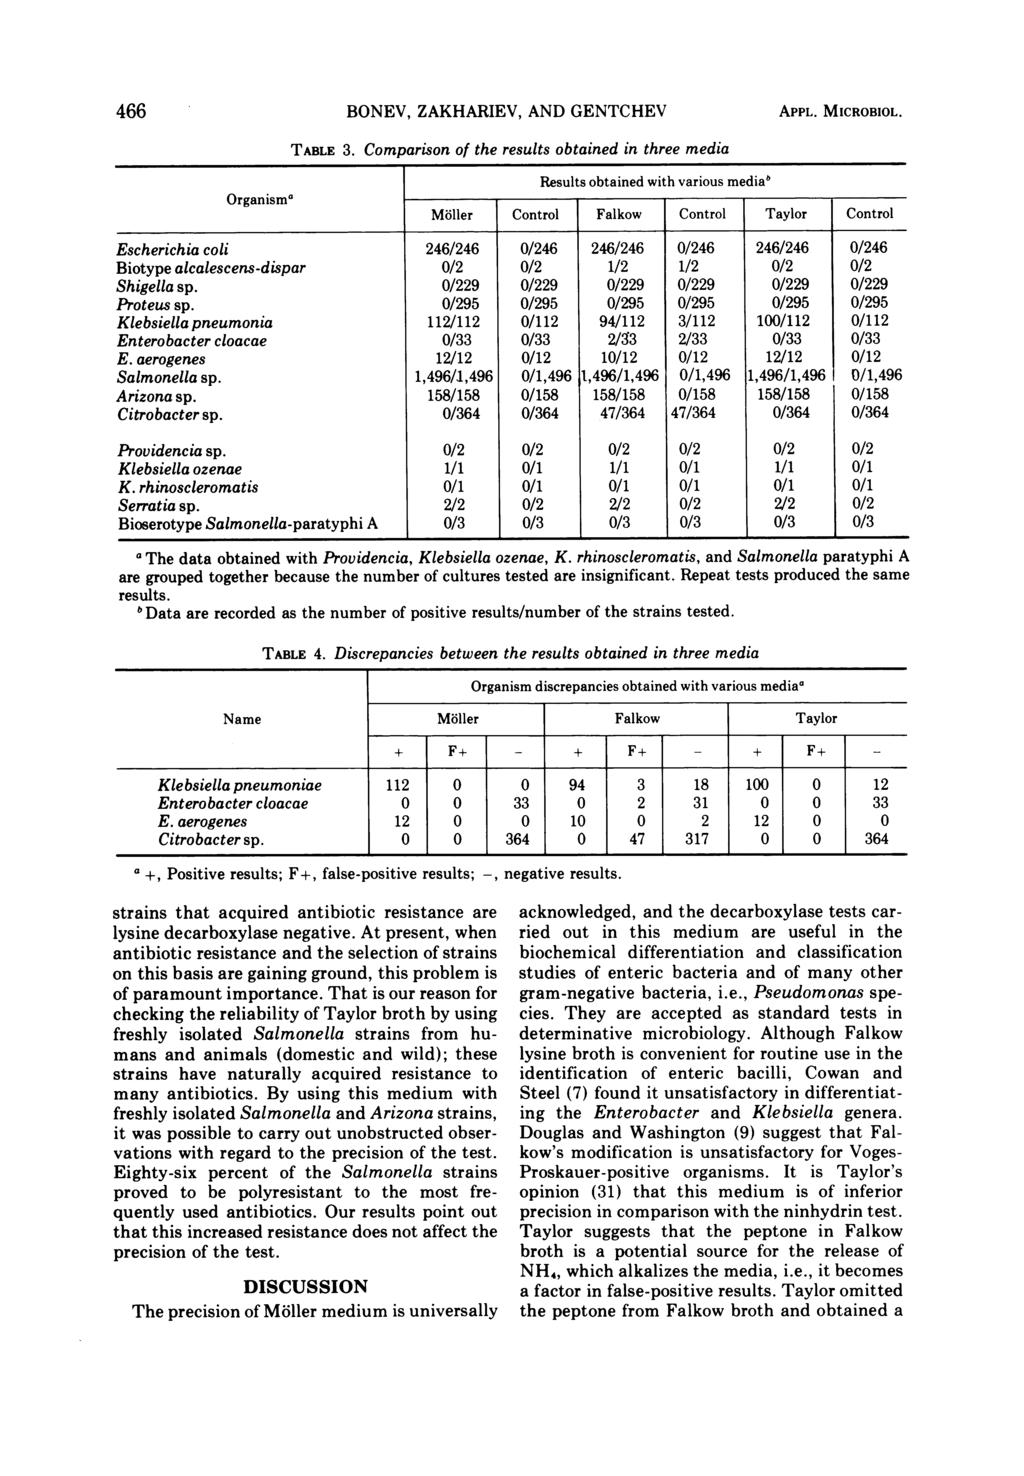 466 Organisma TABLE 3. BONEV, ZAKHARIEV, AND GENTCHEV Comparison of the results obtained in three media Results obtained with various media' APPL. MICROBIOL.